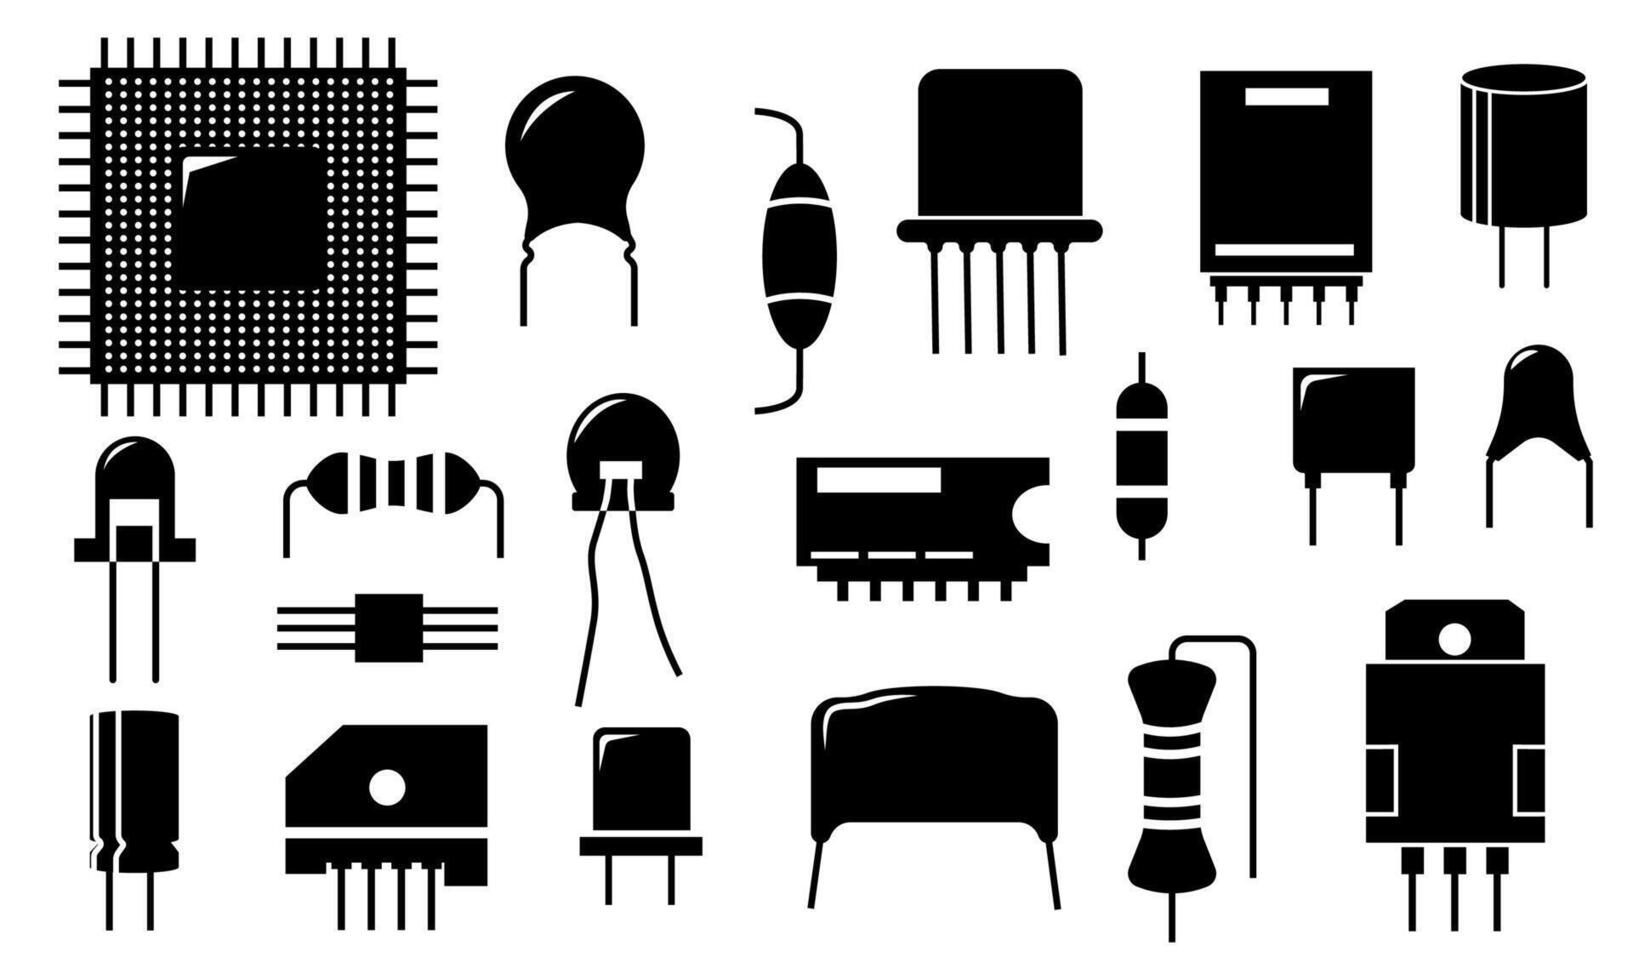 Black electronic component icons. Electric circuit conductor and semiconductor parts, diode transistor resistor capacitor elements. Vector set